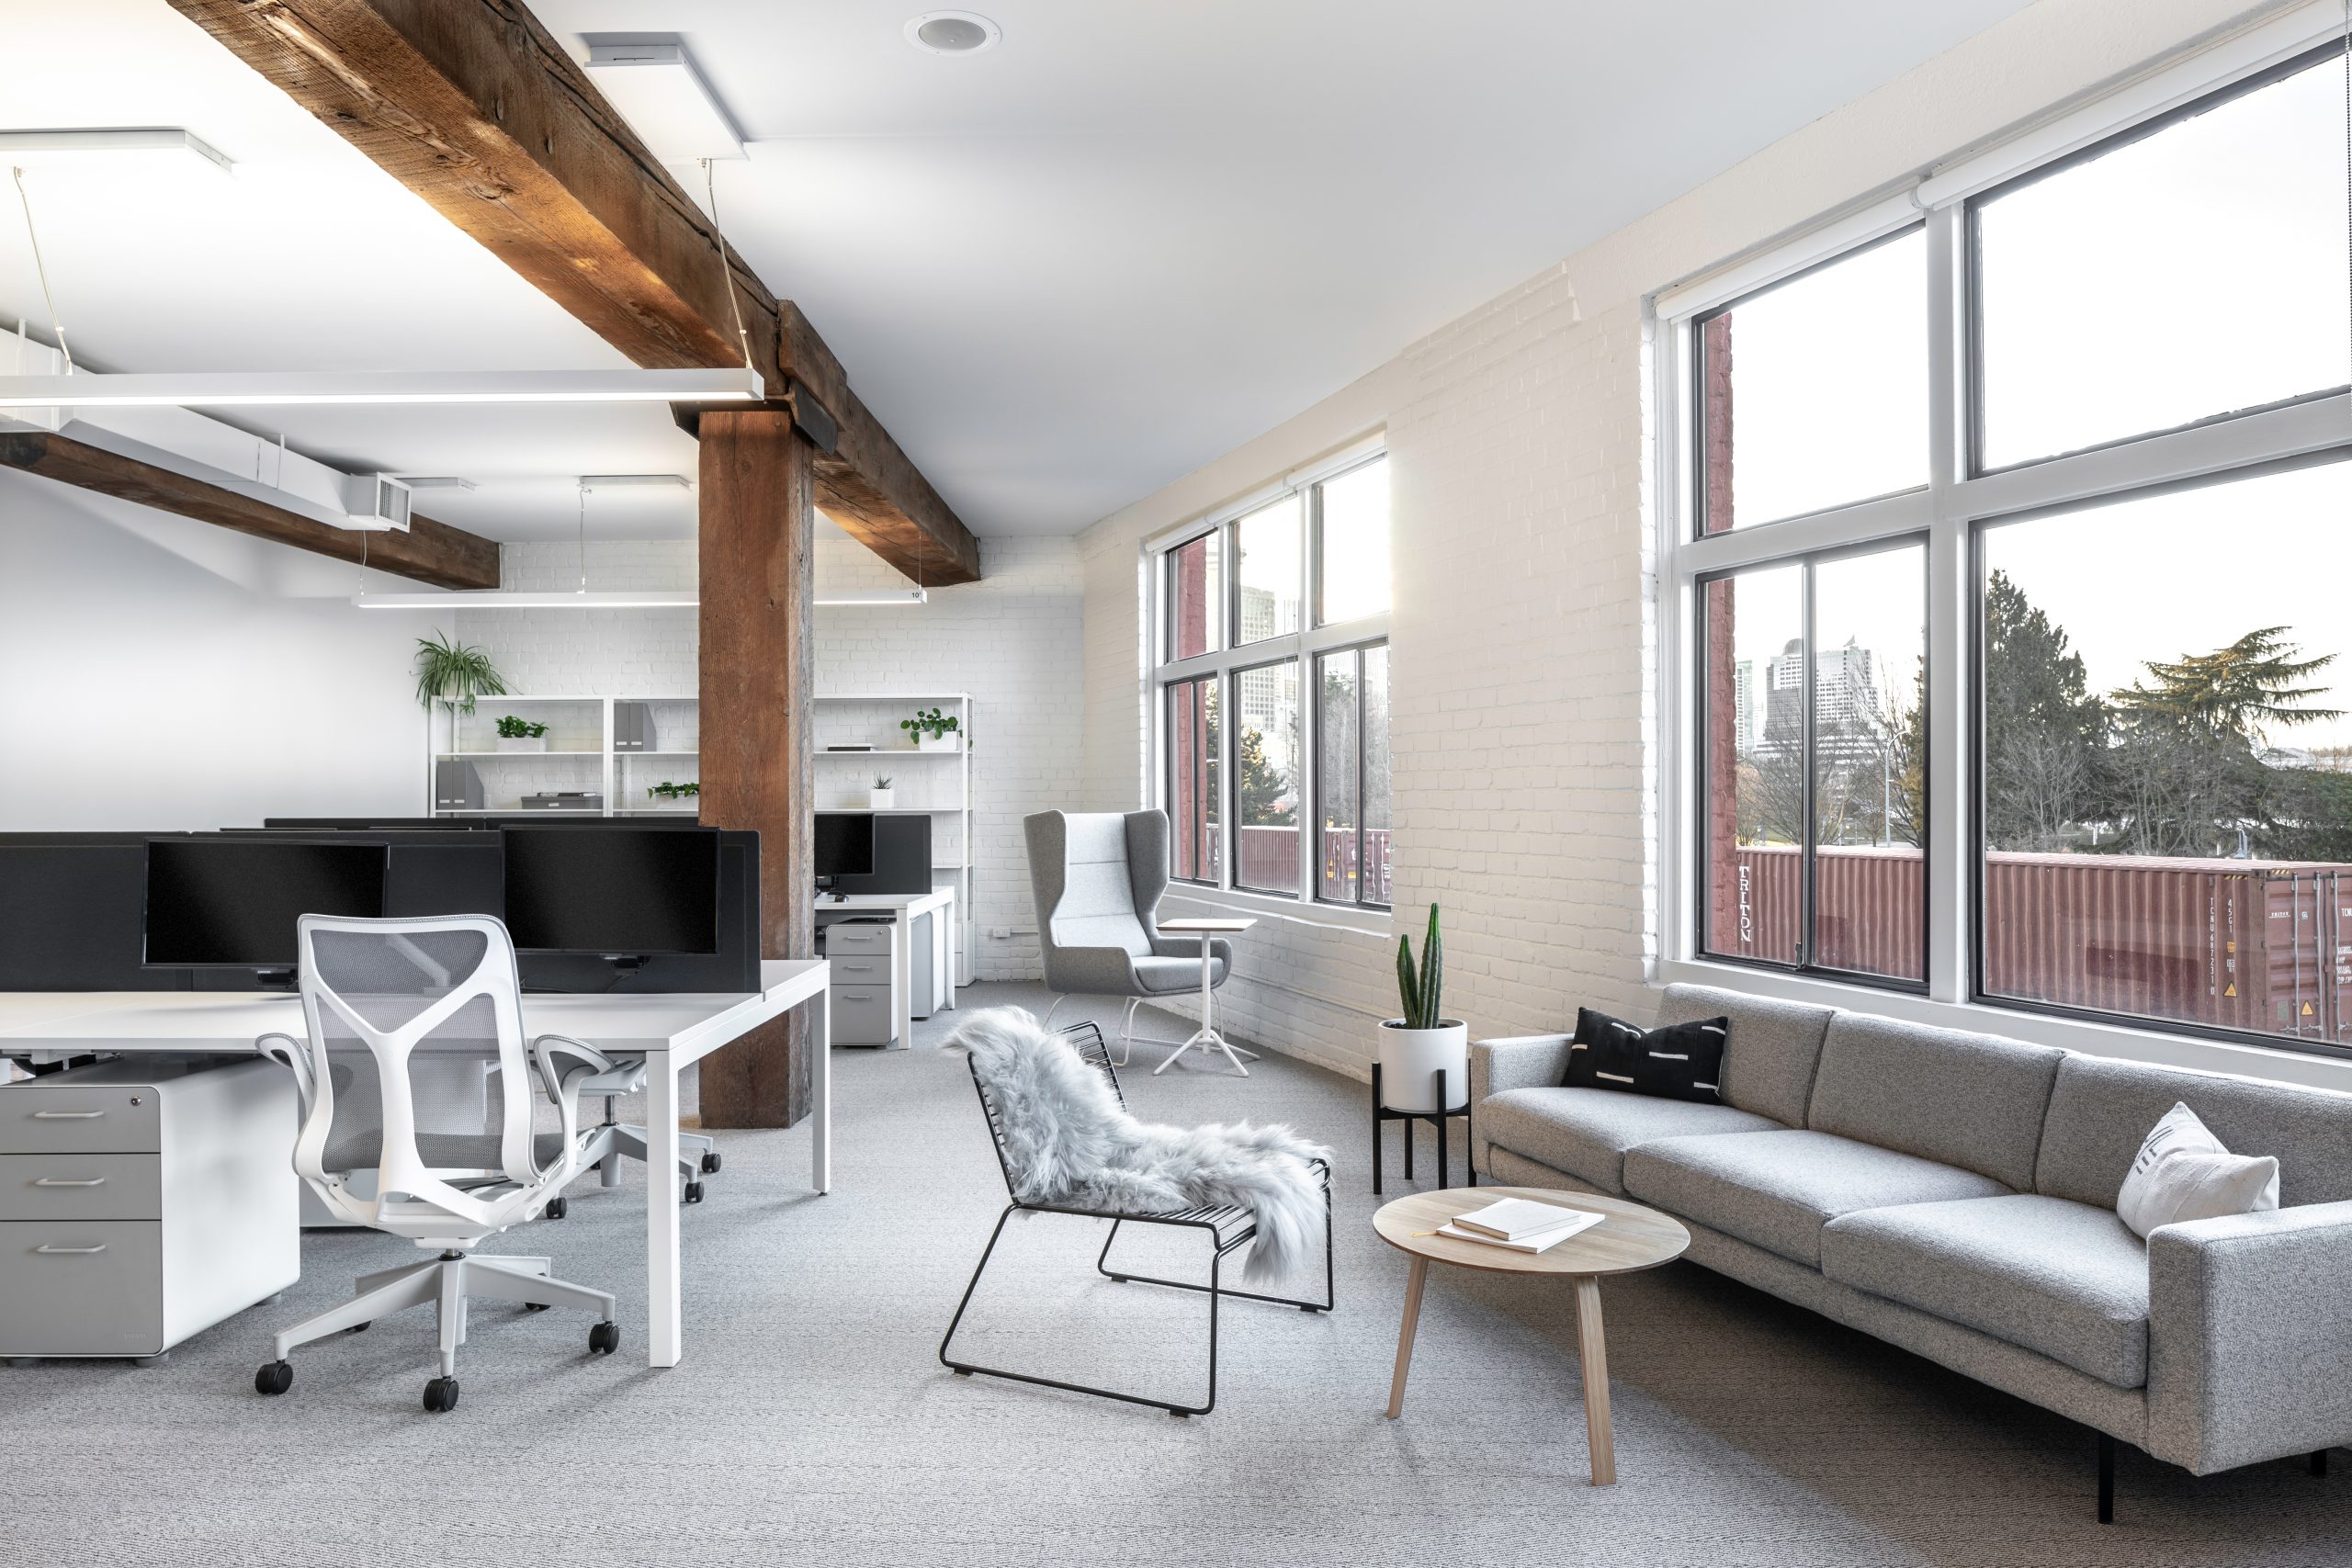 Bright and white workspace interior, showing lounge area and big windows at Cutler's studio space in Vancouver BC